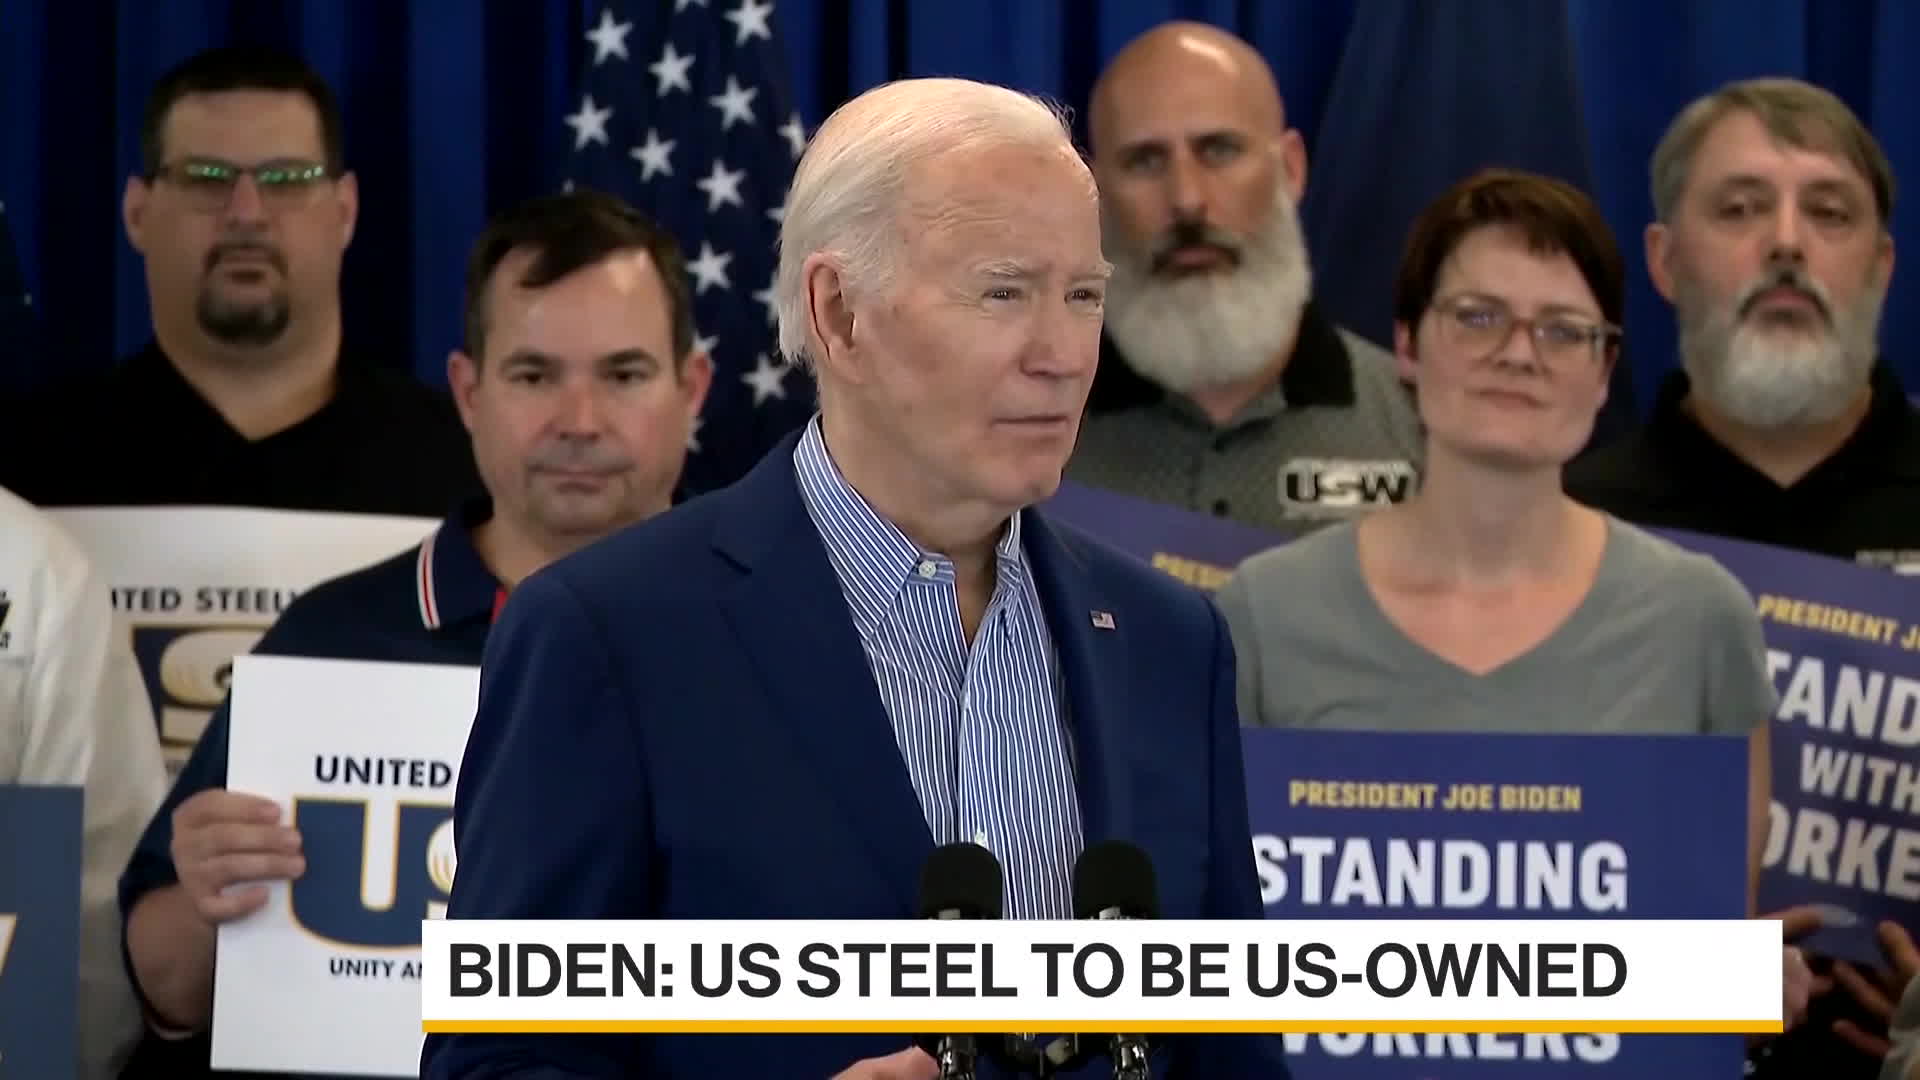 US Steel 'Guaranteed' to Stay American-Owned, President Biden Says - Bloomberg